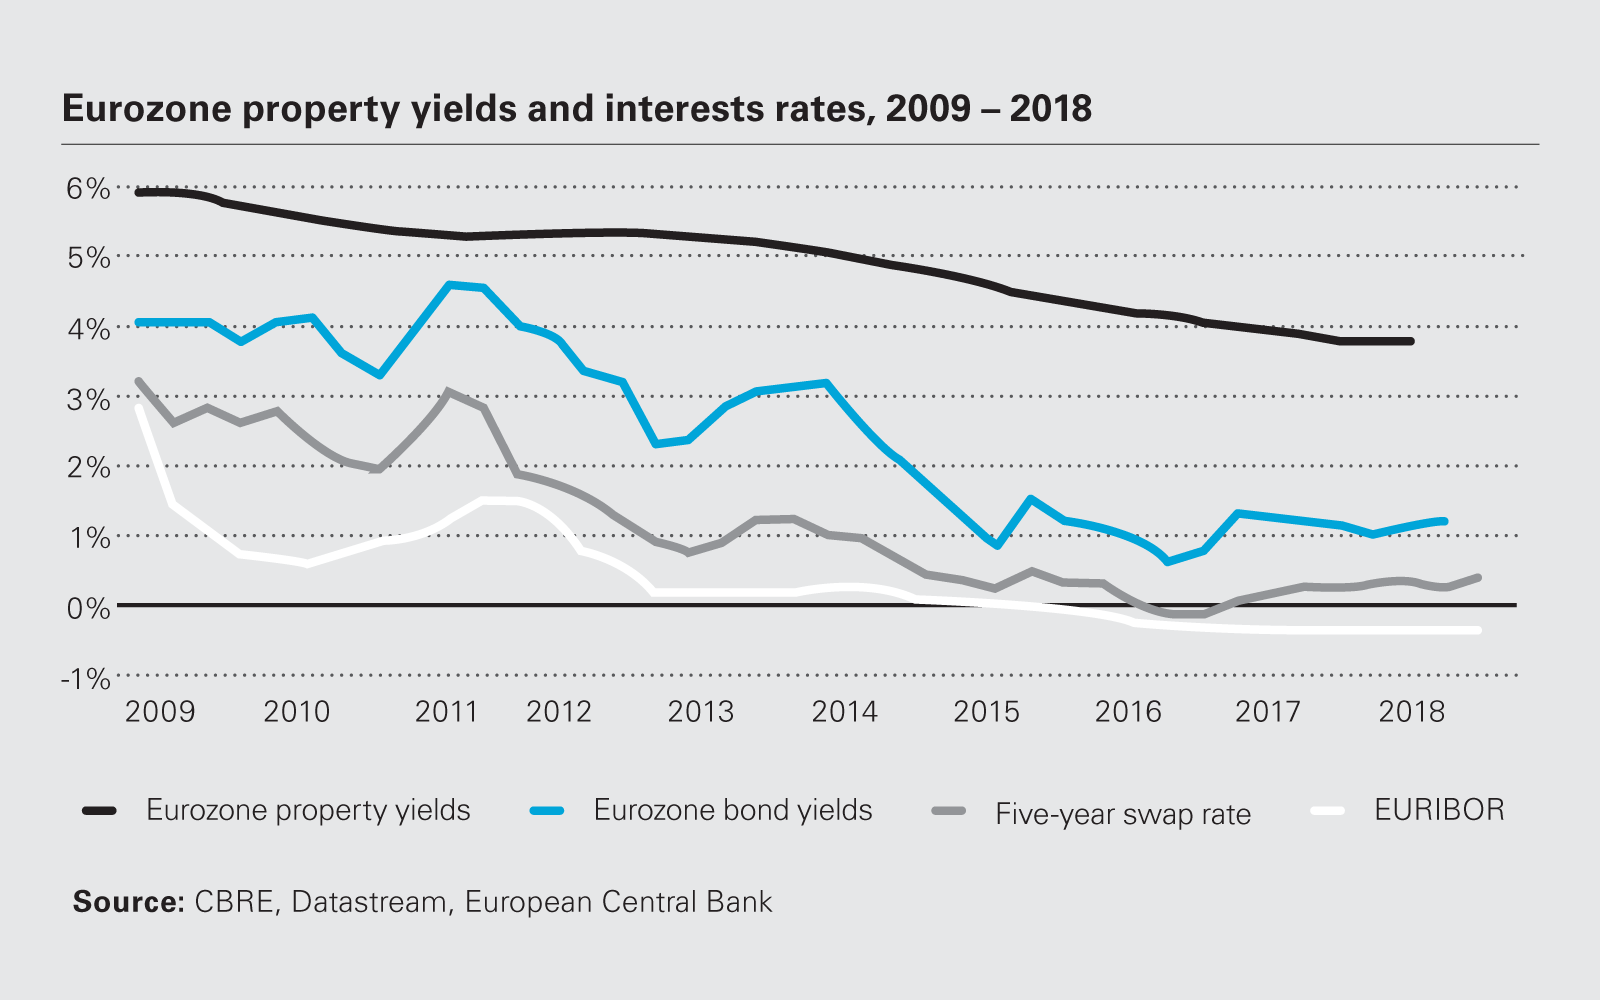 Eurozone property yields and interests rates, 2009-2018